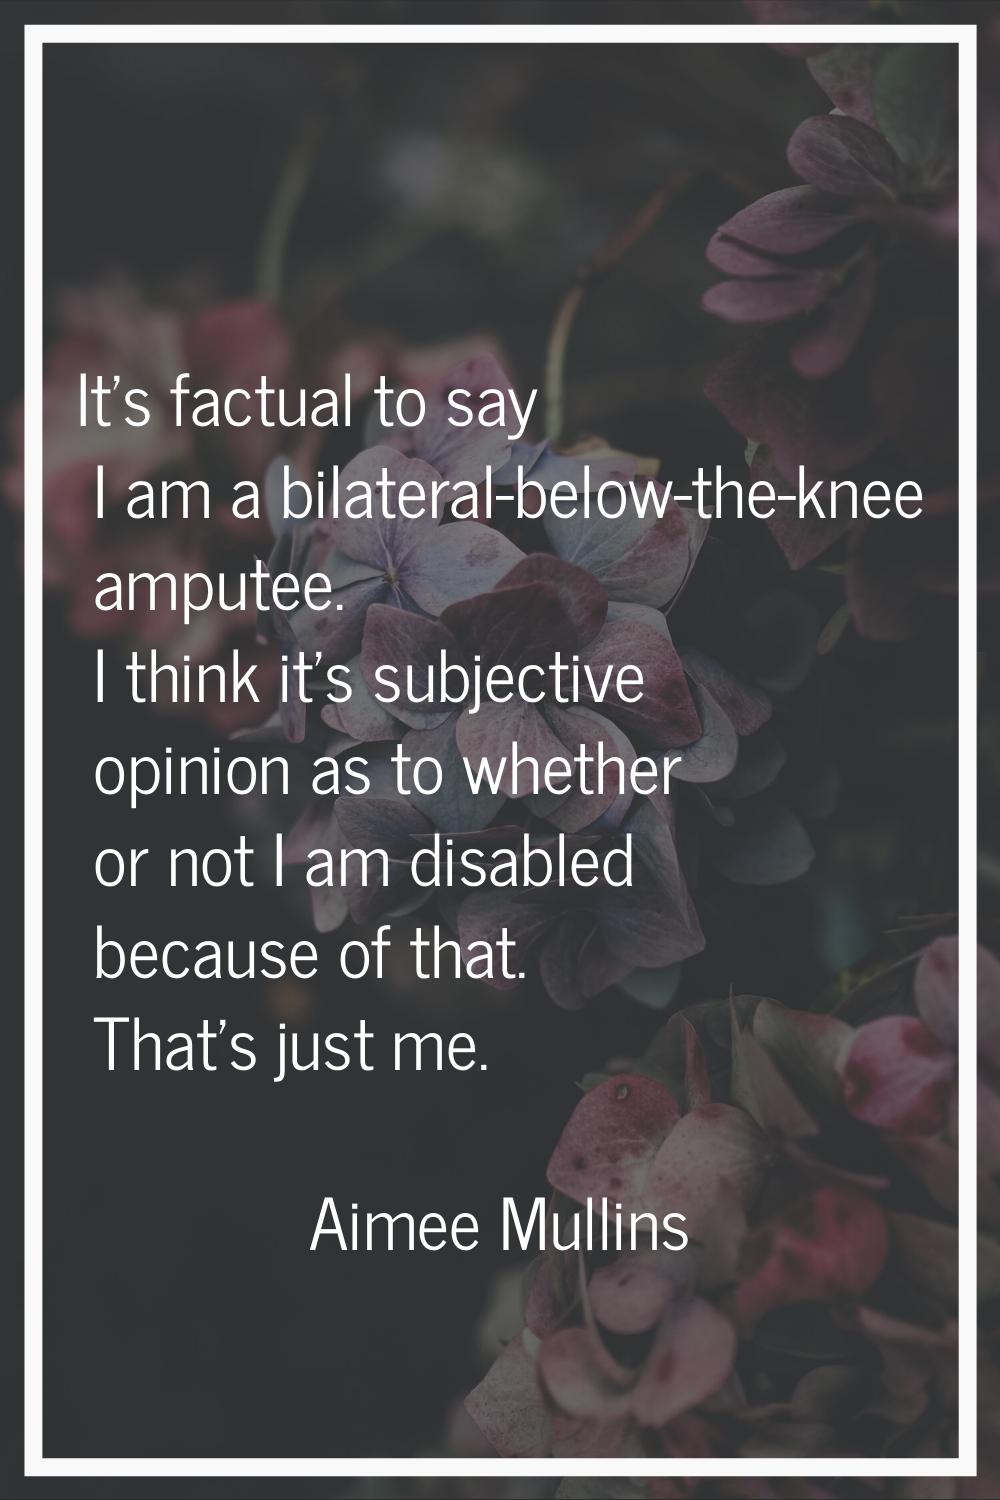 It's factual to say I am a bilateral-below-the-knee amputee. I think it's subjective opinion as to 